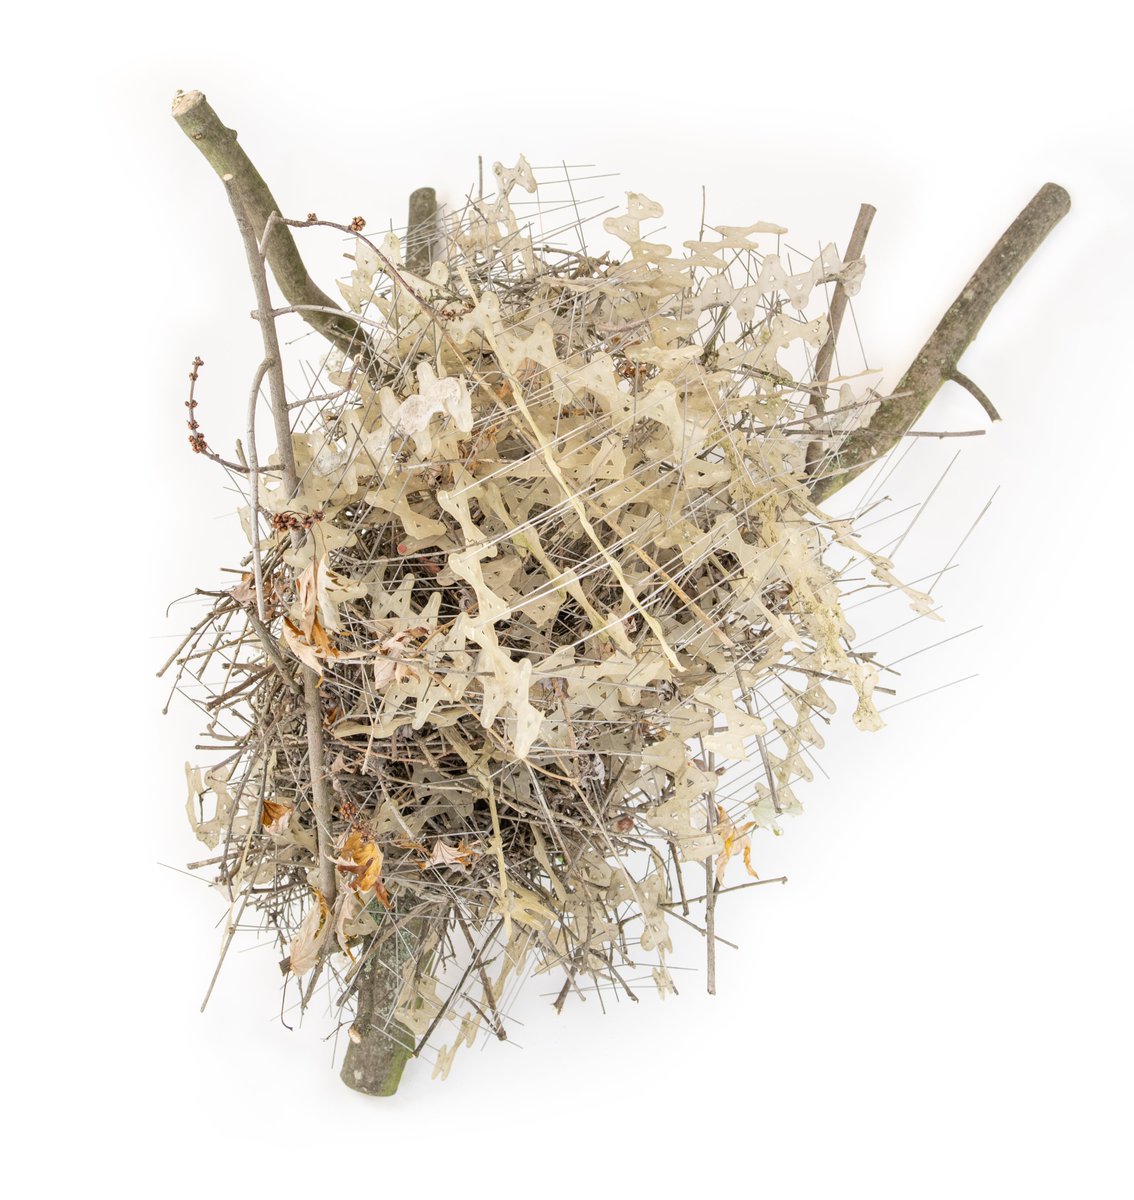 Bird nests made from anti-bird spikes! 🤯 Even for me as a nest researcher, these are the craziest bird nests I've ever seen. Today my paper came out on this rebellious behaviour. And it's like telling a joke... A thread. 🧵